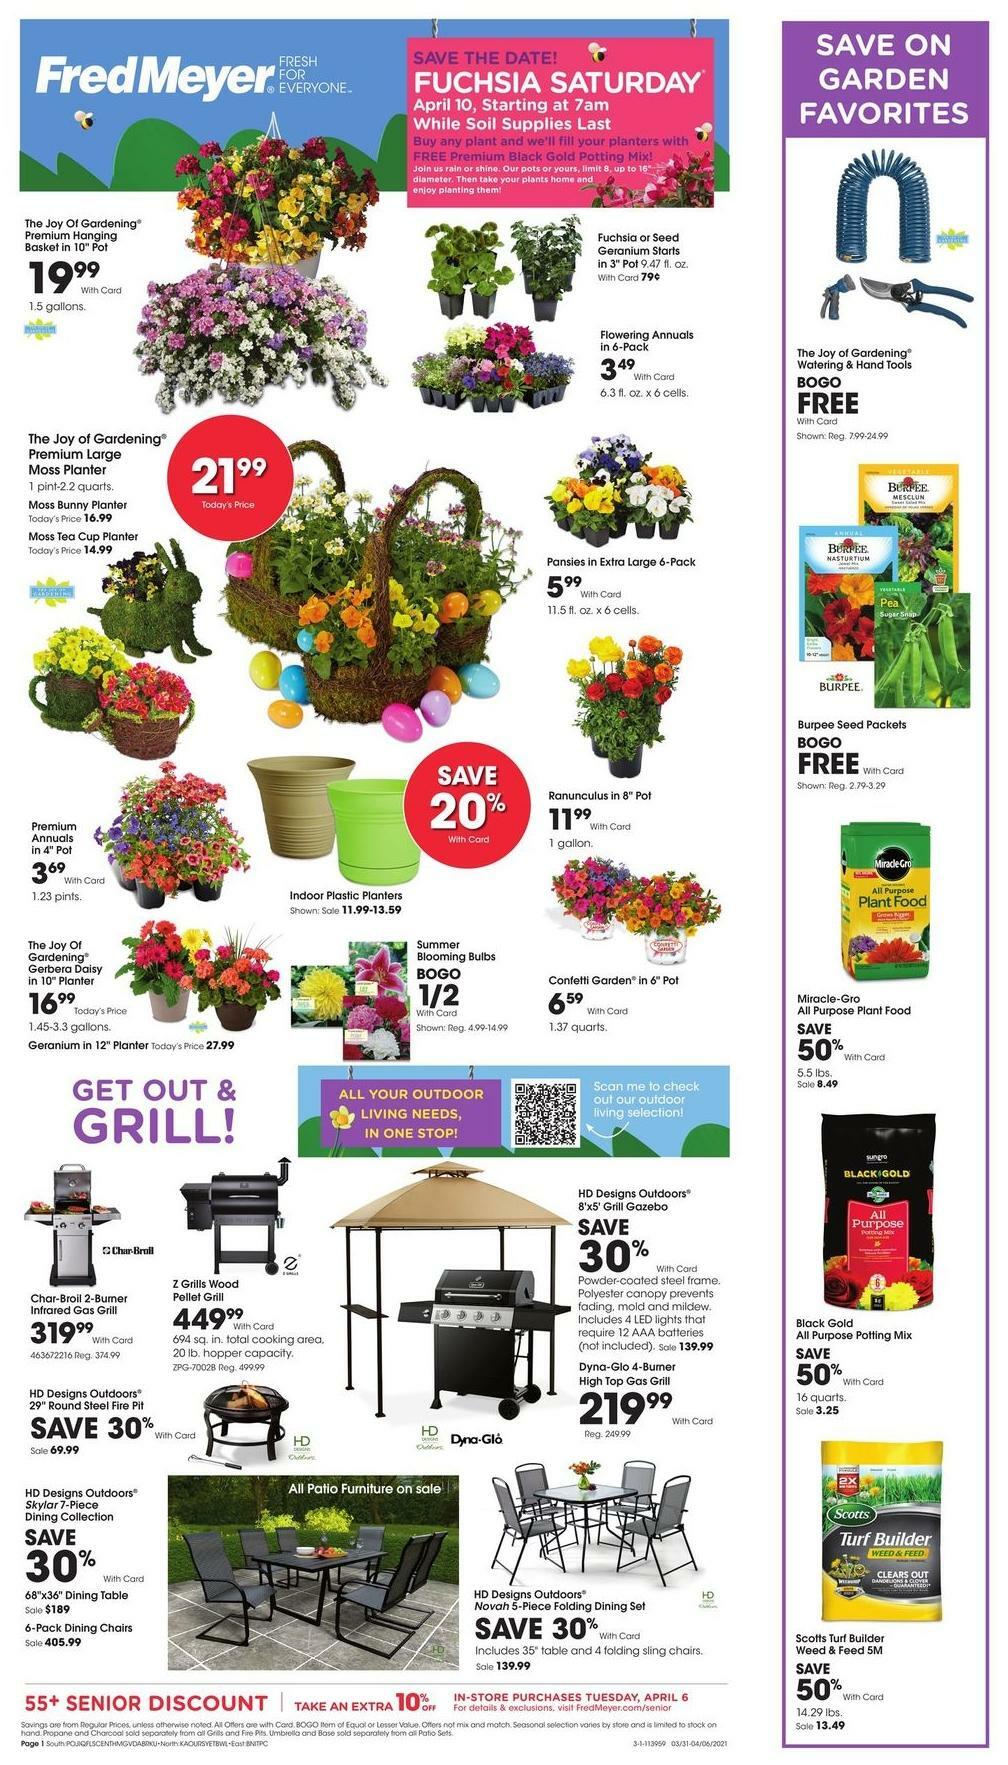 Fred Meyer Garden Weekly Ad & Specials from March 31